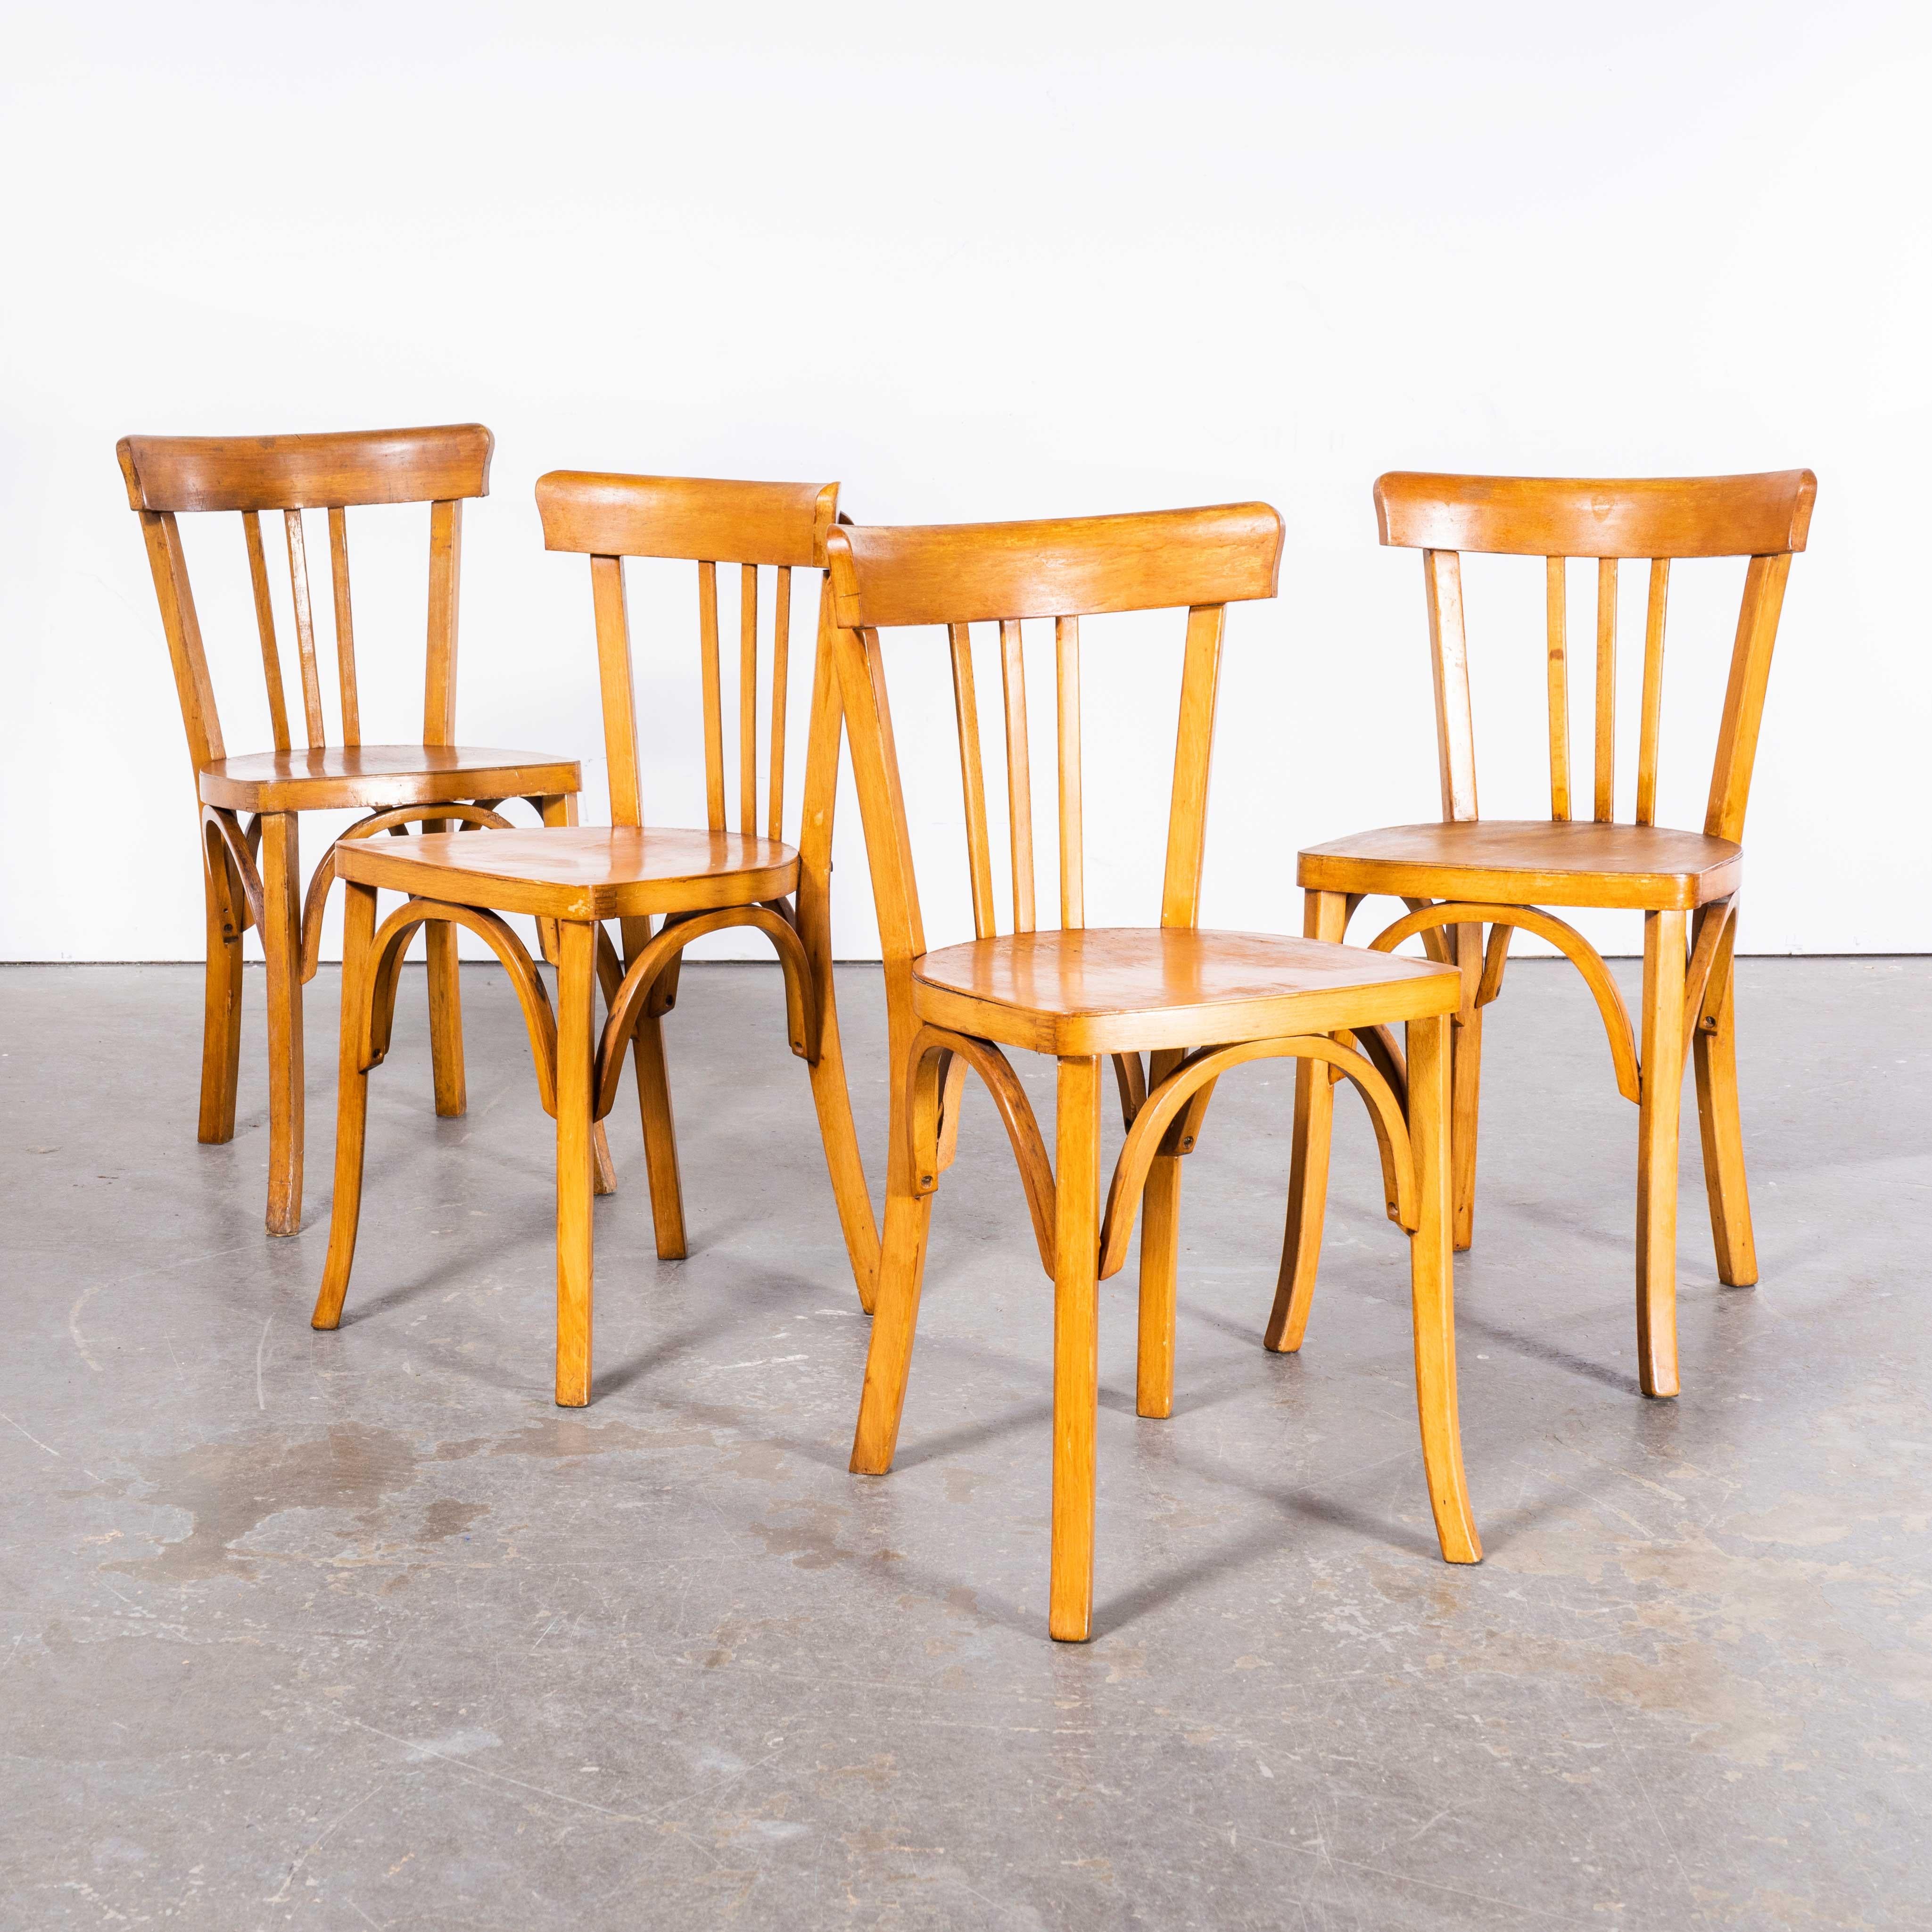 Mid-20th Century 1950s Baumann Honey Tri Back Dining Chair - Set of Four For Sale